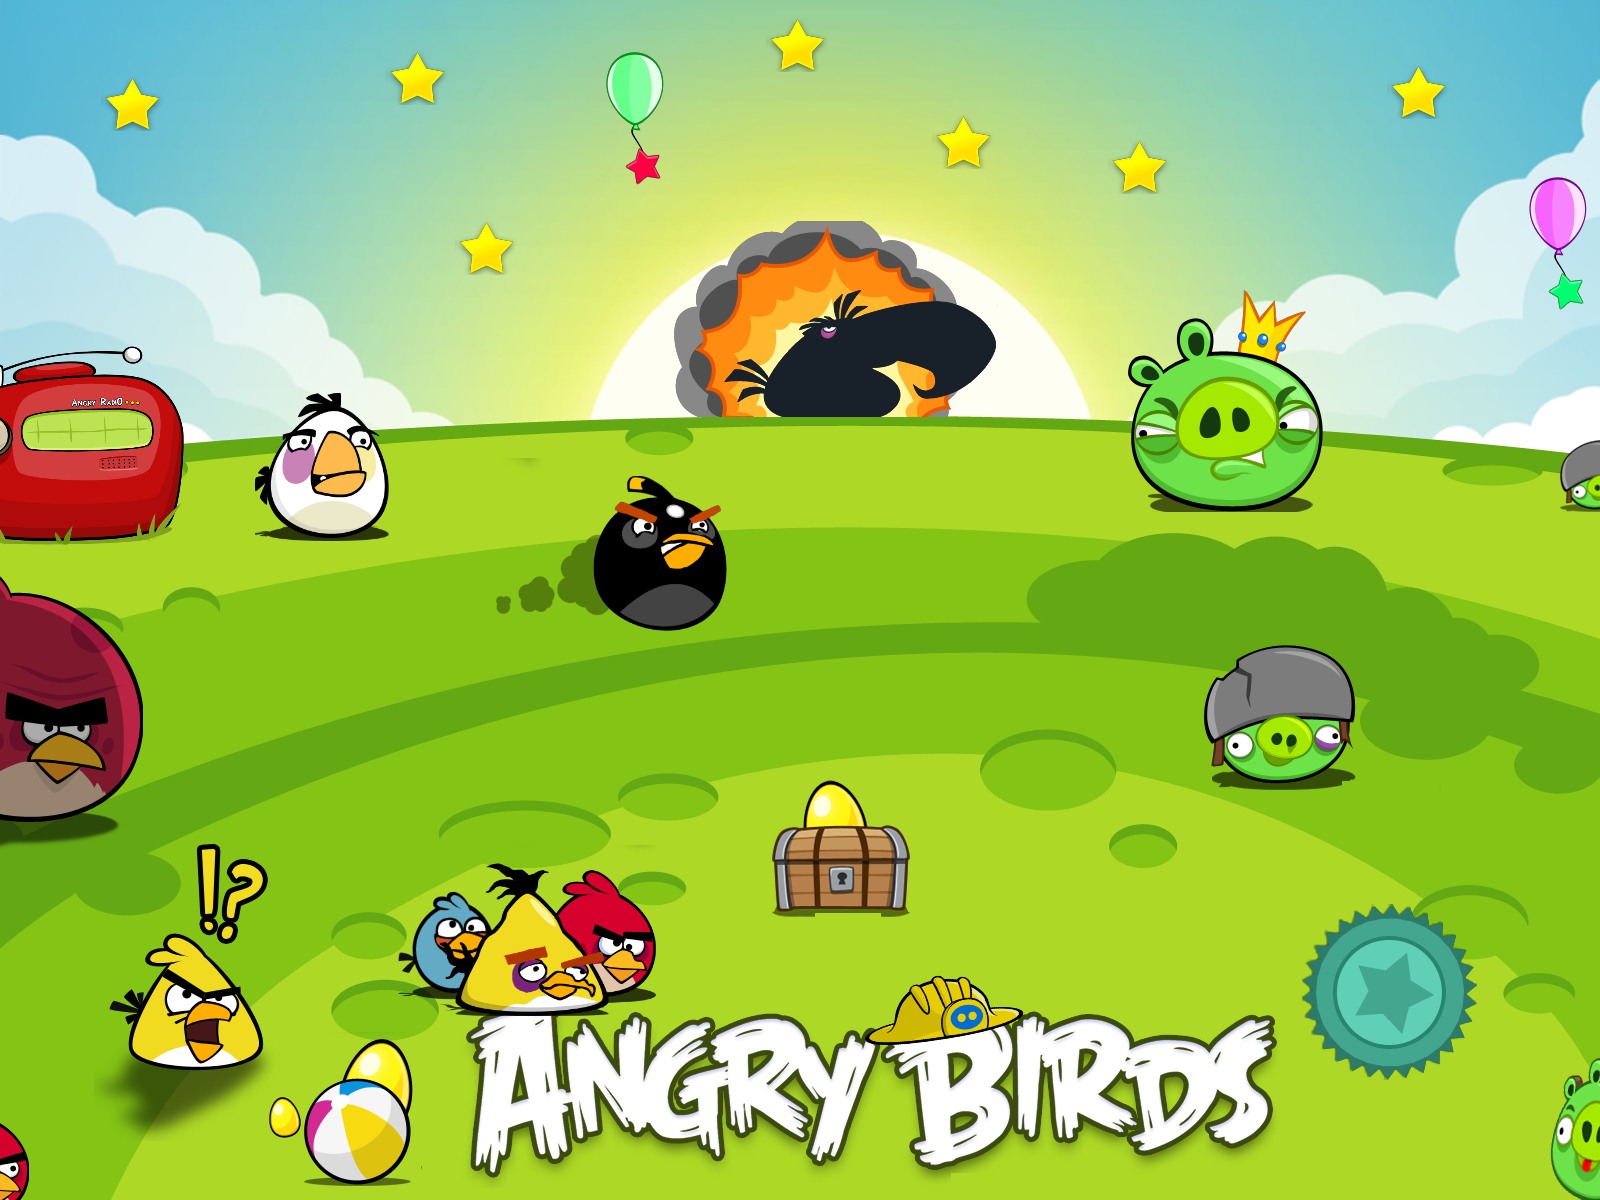 Angry Birds Game Wallpapers #12 - 1600x1200